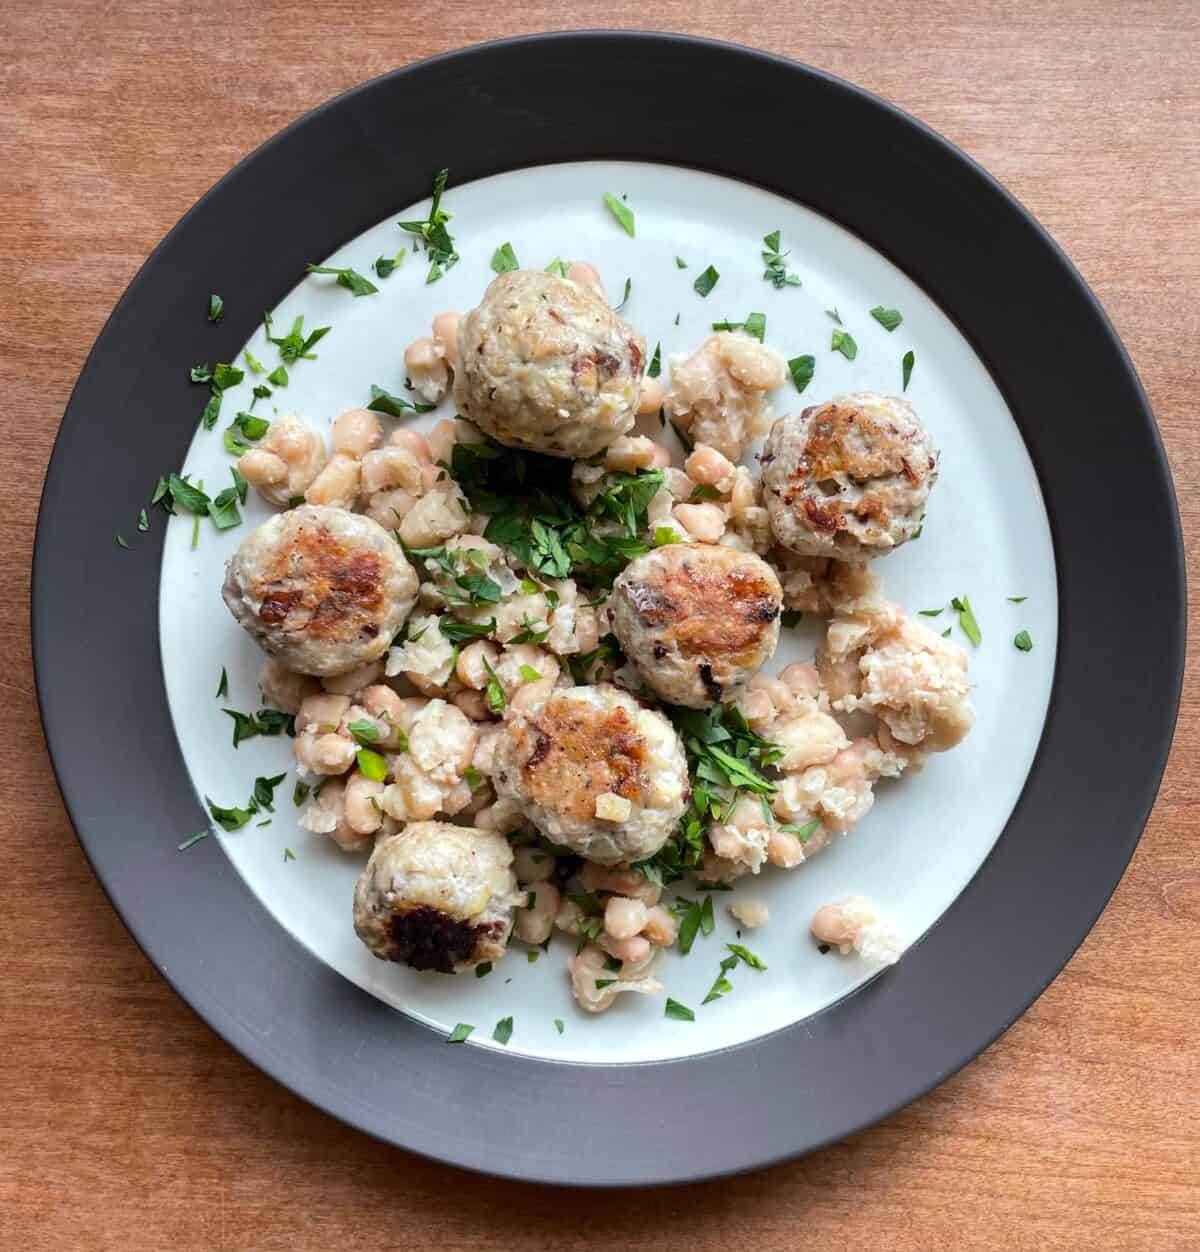 a plate of chicken and apple meatballs with white beans and parsley.